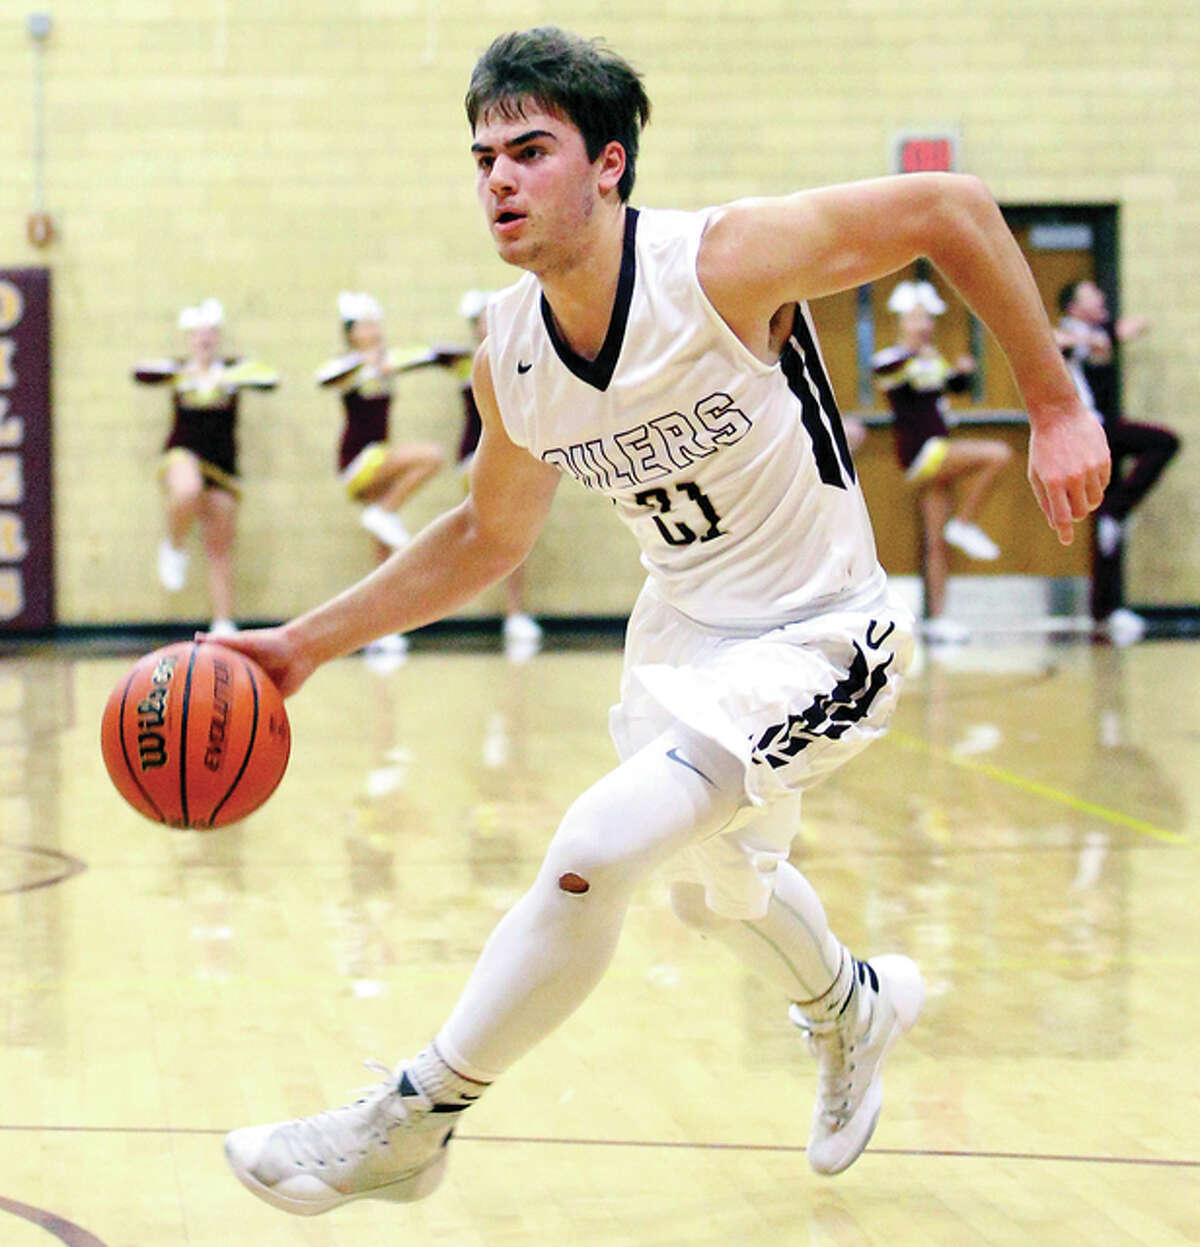 East Alton-Wood River’s Blake Marks scored 23 points in his team’s victory over Brussels and joined his school’s 1,000-point career scoring club Wednesday night at Memorial Gym.